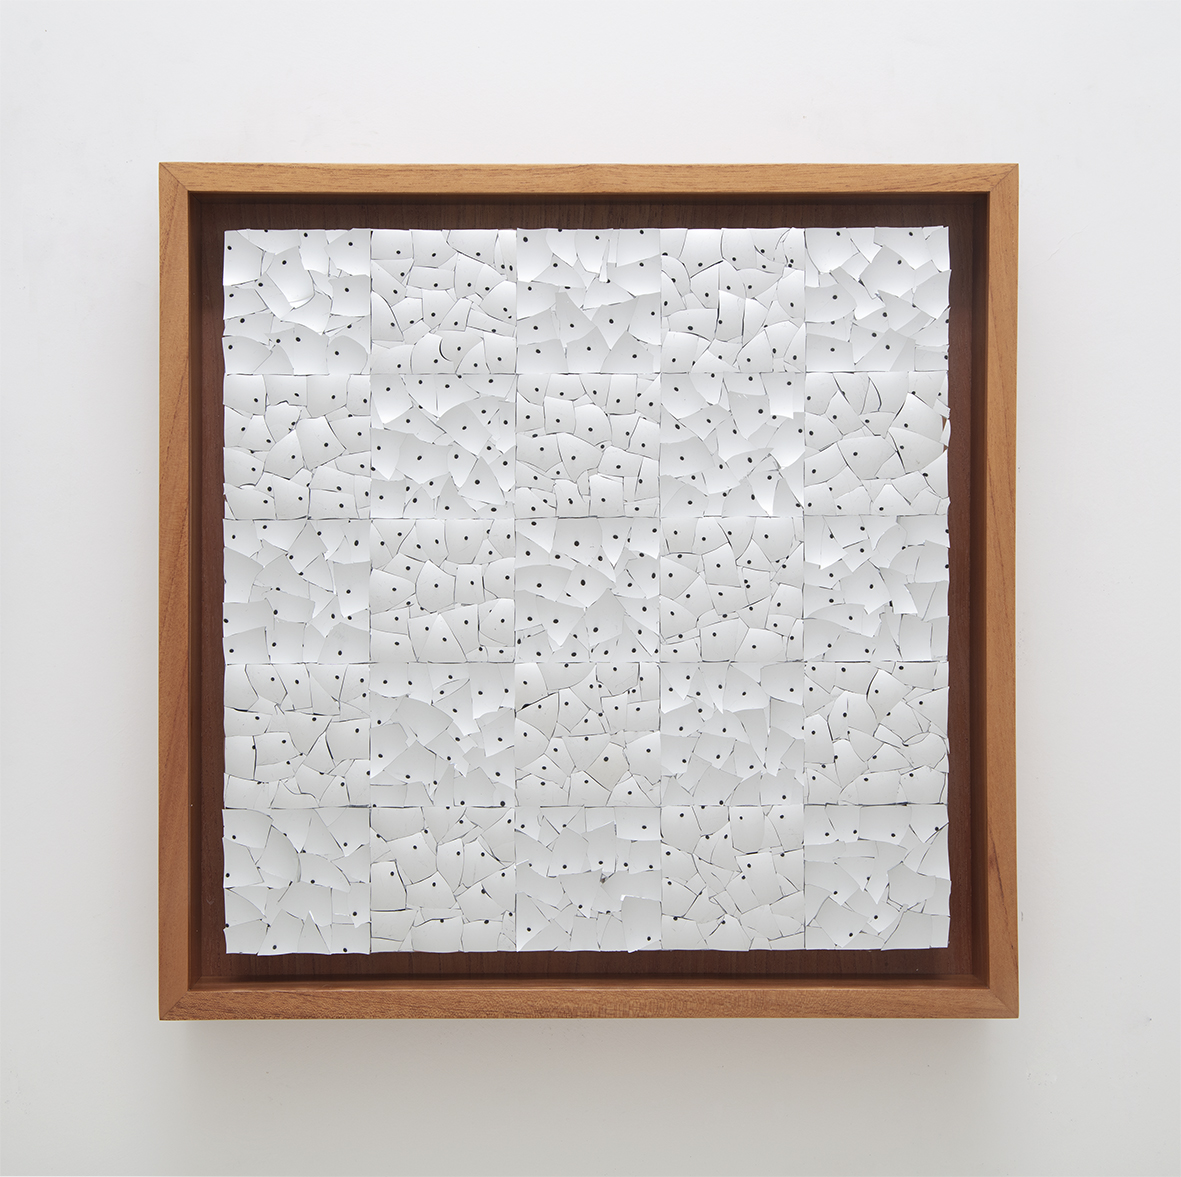 The Wick - Gabriel de la Mora
805, 2023
Signed backwards and dated backwards
423 convex blown glass fragments and aluminum and 382
concave blown glass
fragments and aluminum on museum cardboard and
wood
11 3/4 x 11 3/4 x 3/4 in. / 30 x 30 x 2 cm
Framed: 13 3/4 x 13 3/4 x 2 3/8 in. / 35 x 35 x 6 cm © Gabriel de la Mora. Courtesy of Timothy Taylor